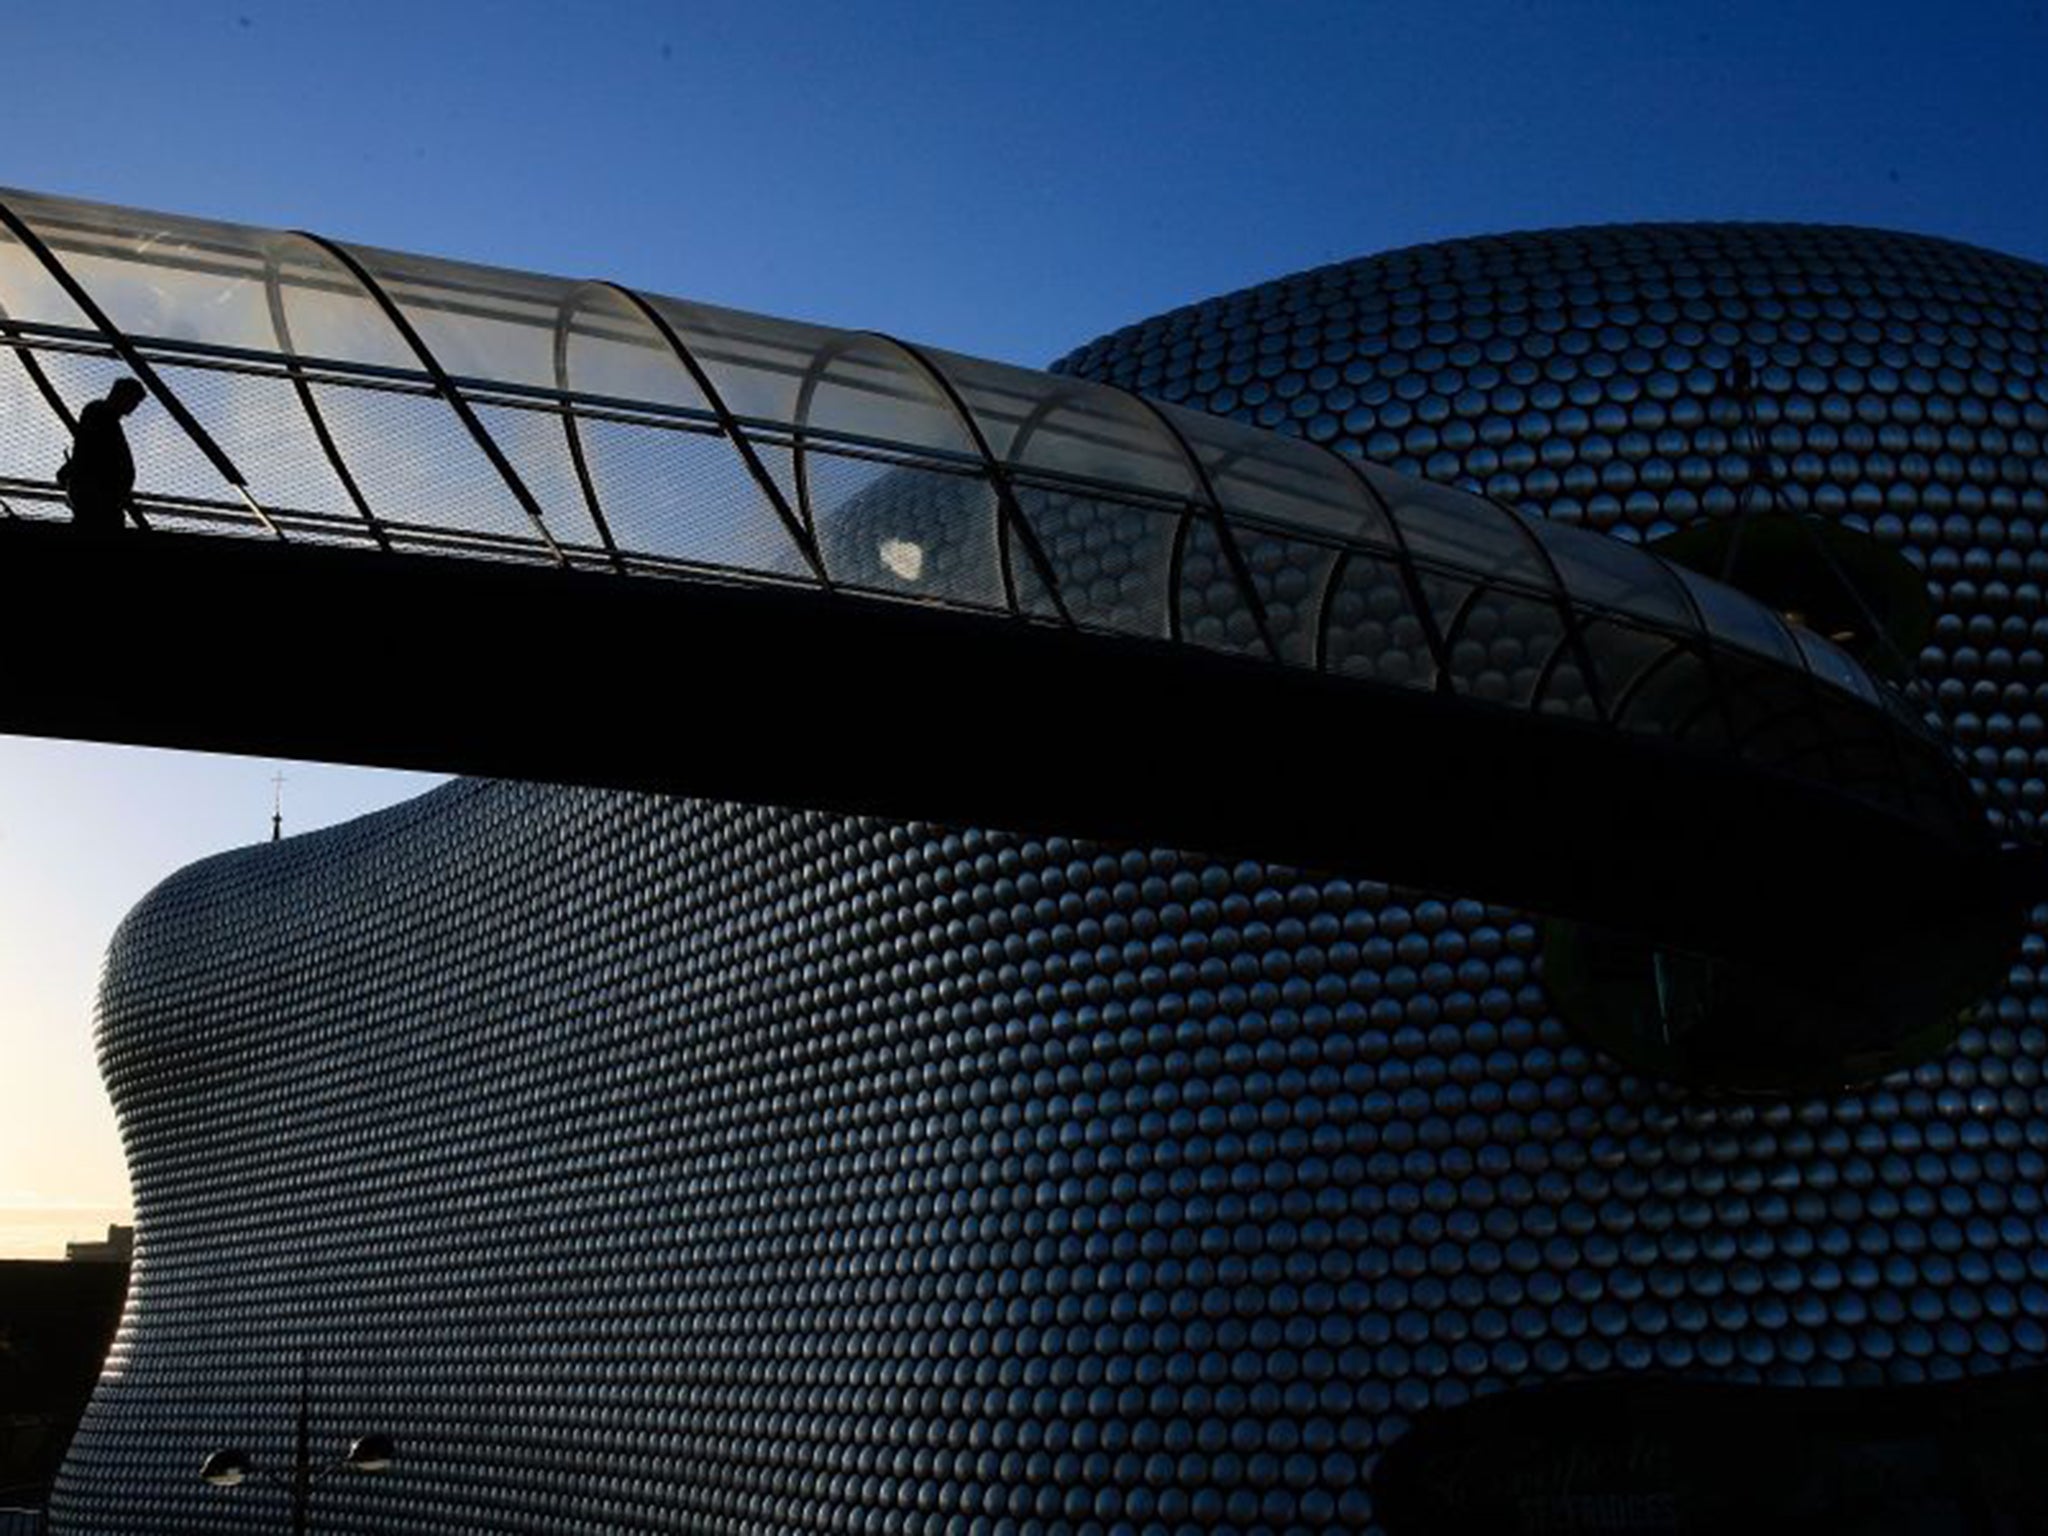 Hammerson is the owner and developer of shopping centres including the Bullring in Birmingham